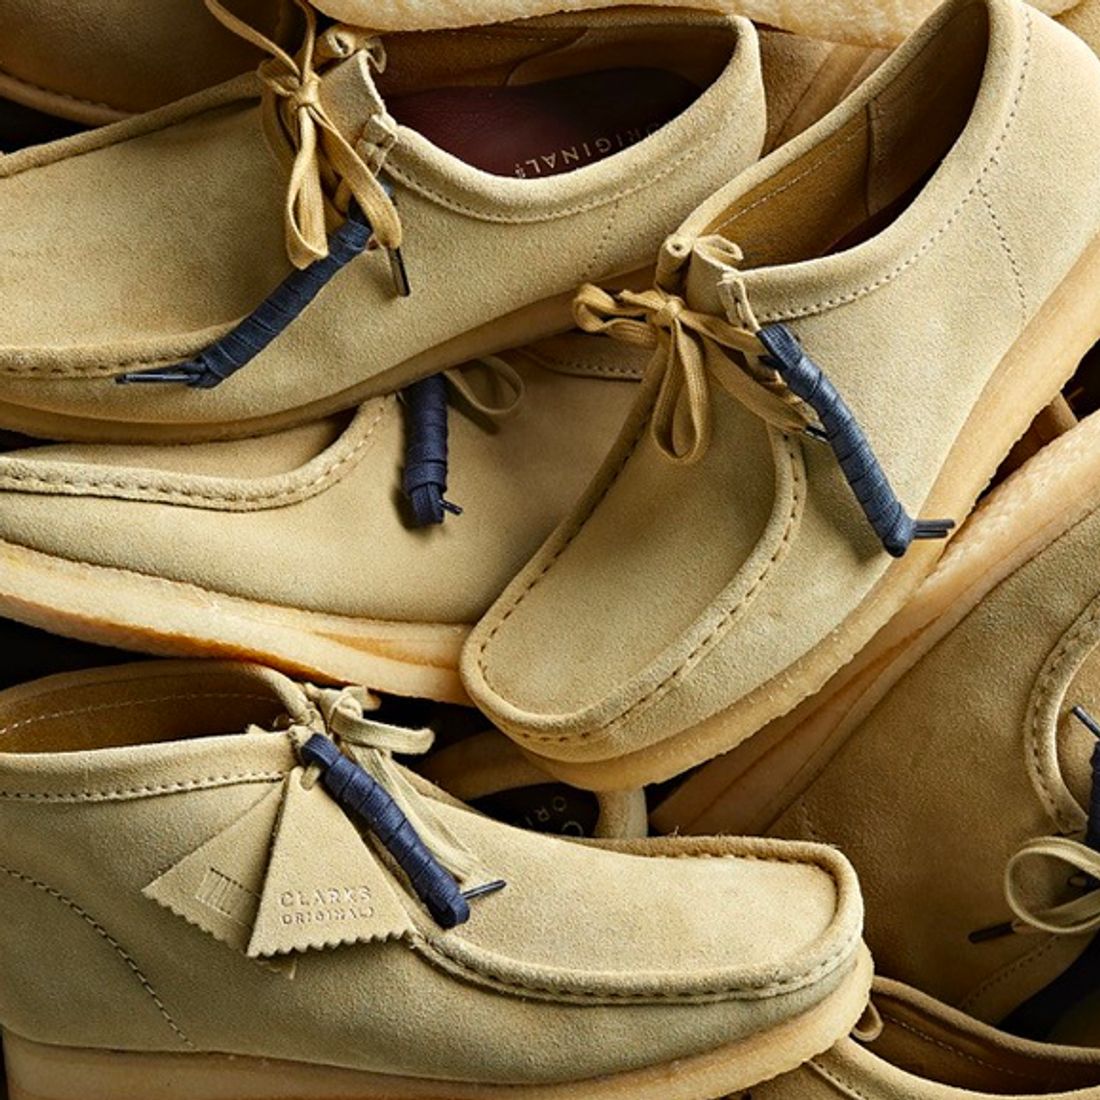 From Dancehall to Hip Hop: A Sonic History of the Clarks Originals Wallabee  - Sneaker Freaker